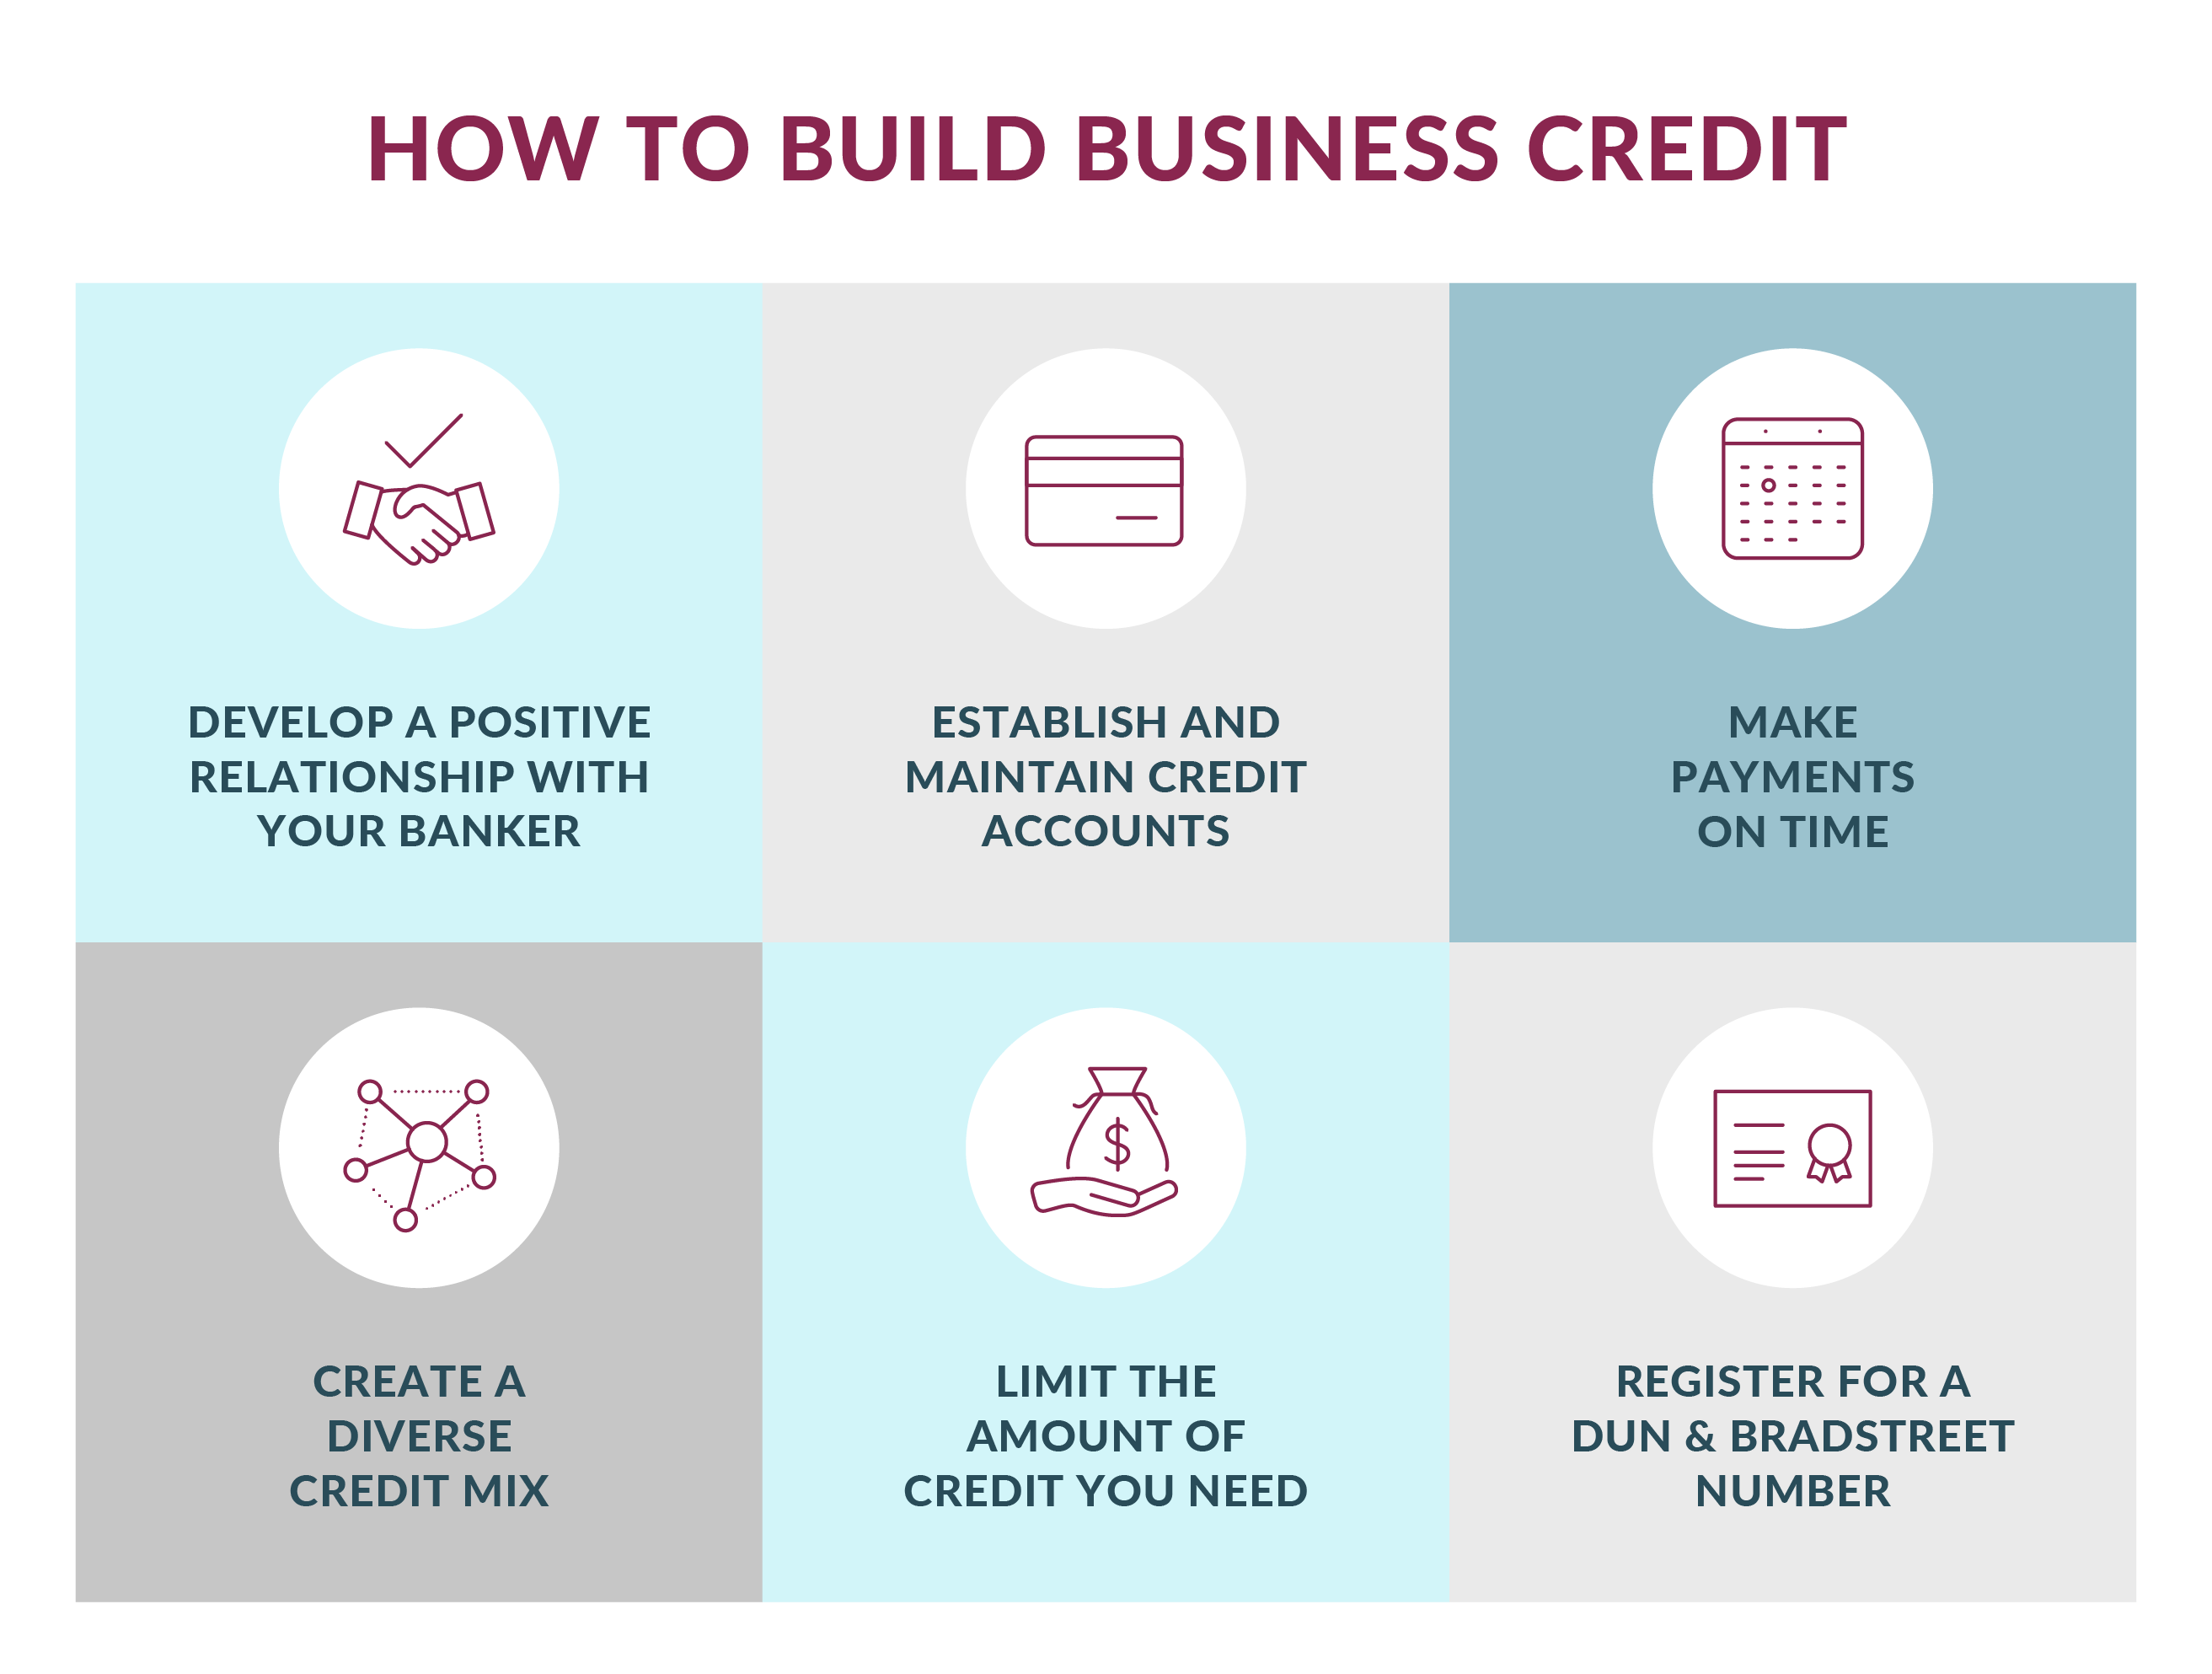 How to build business credit